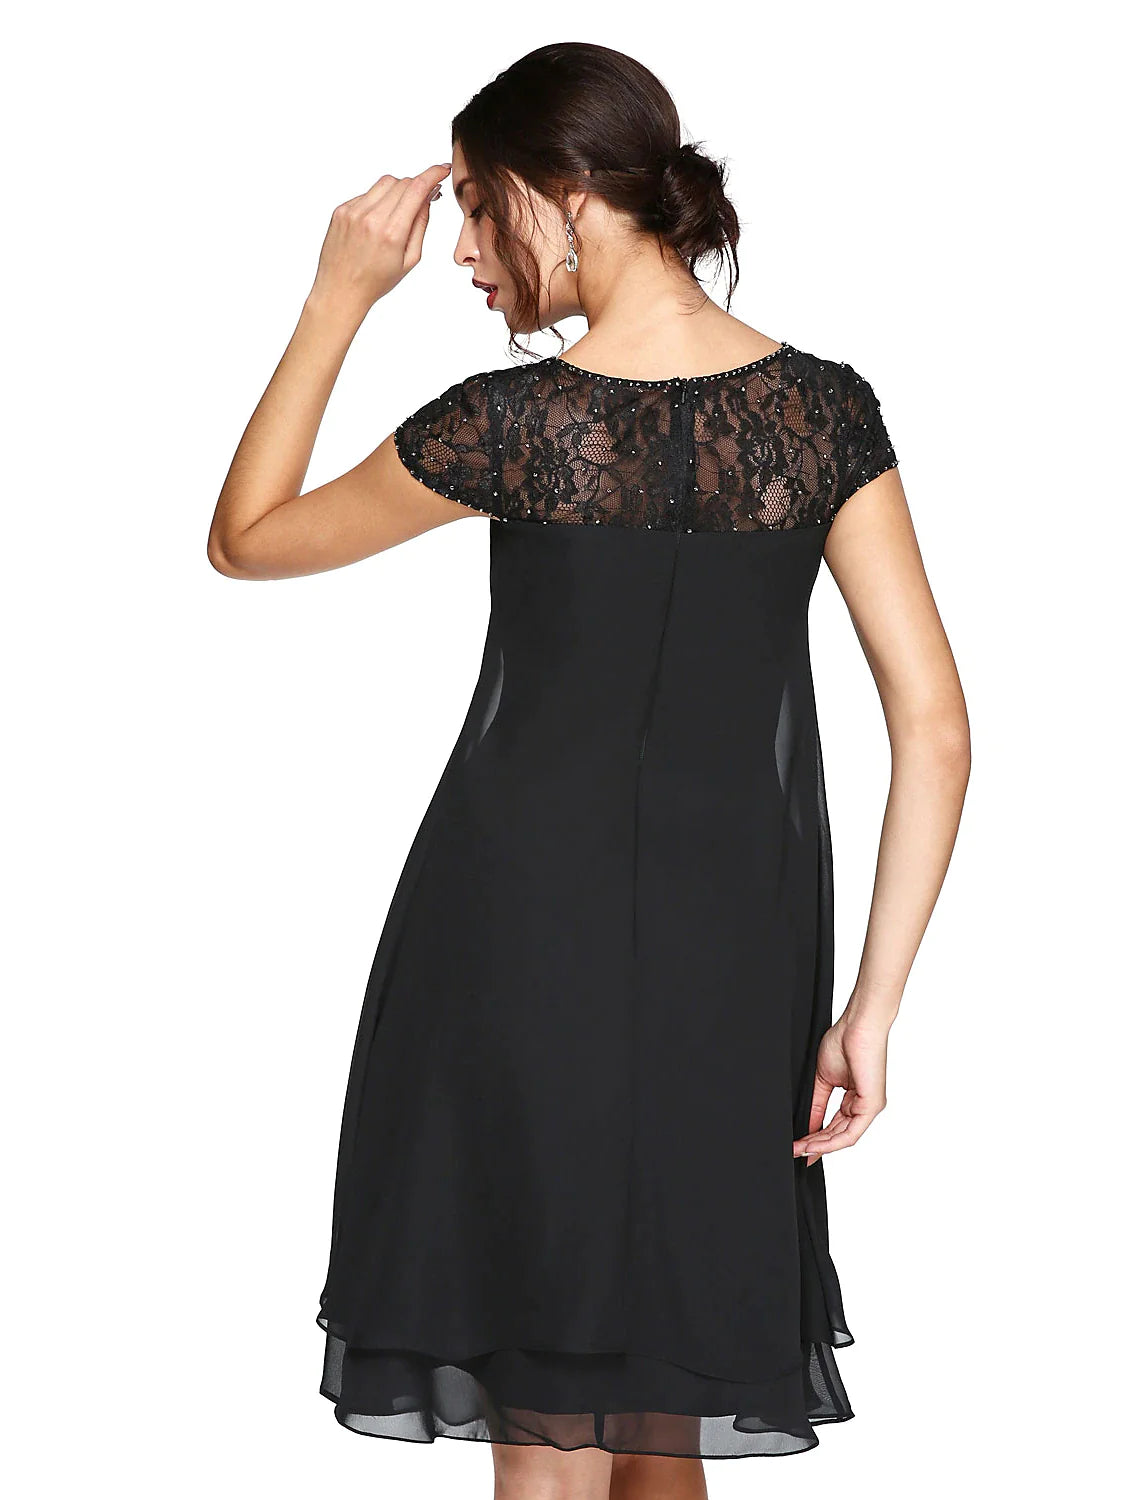 A-Line Mother of the Bride Dress Plus Size Elegant Illusion Neck Knee Length Chiffon Lace Short Sleeve with Sequin